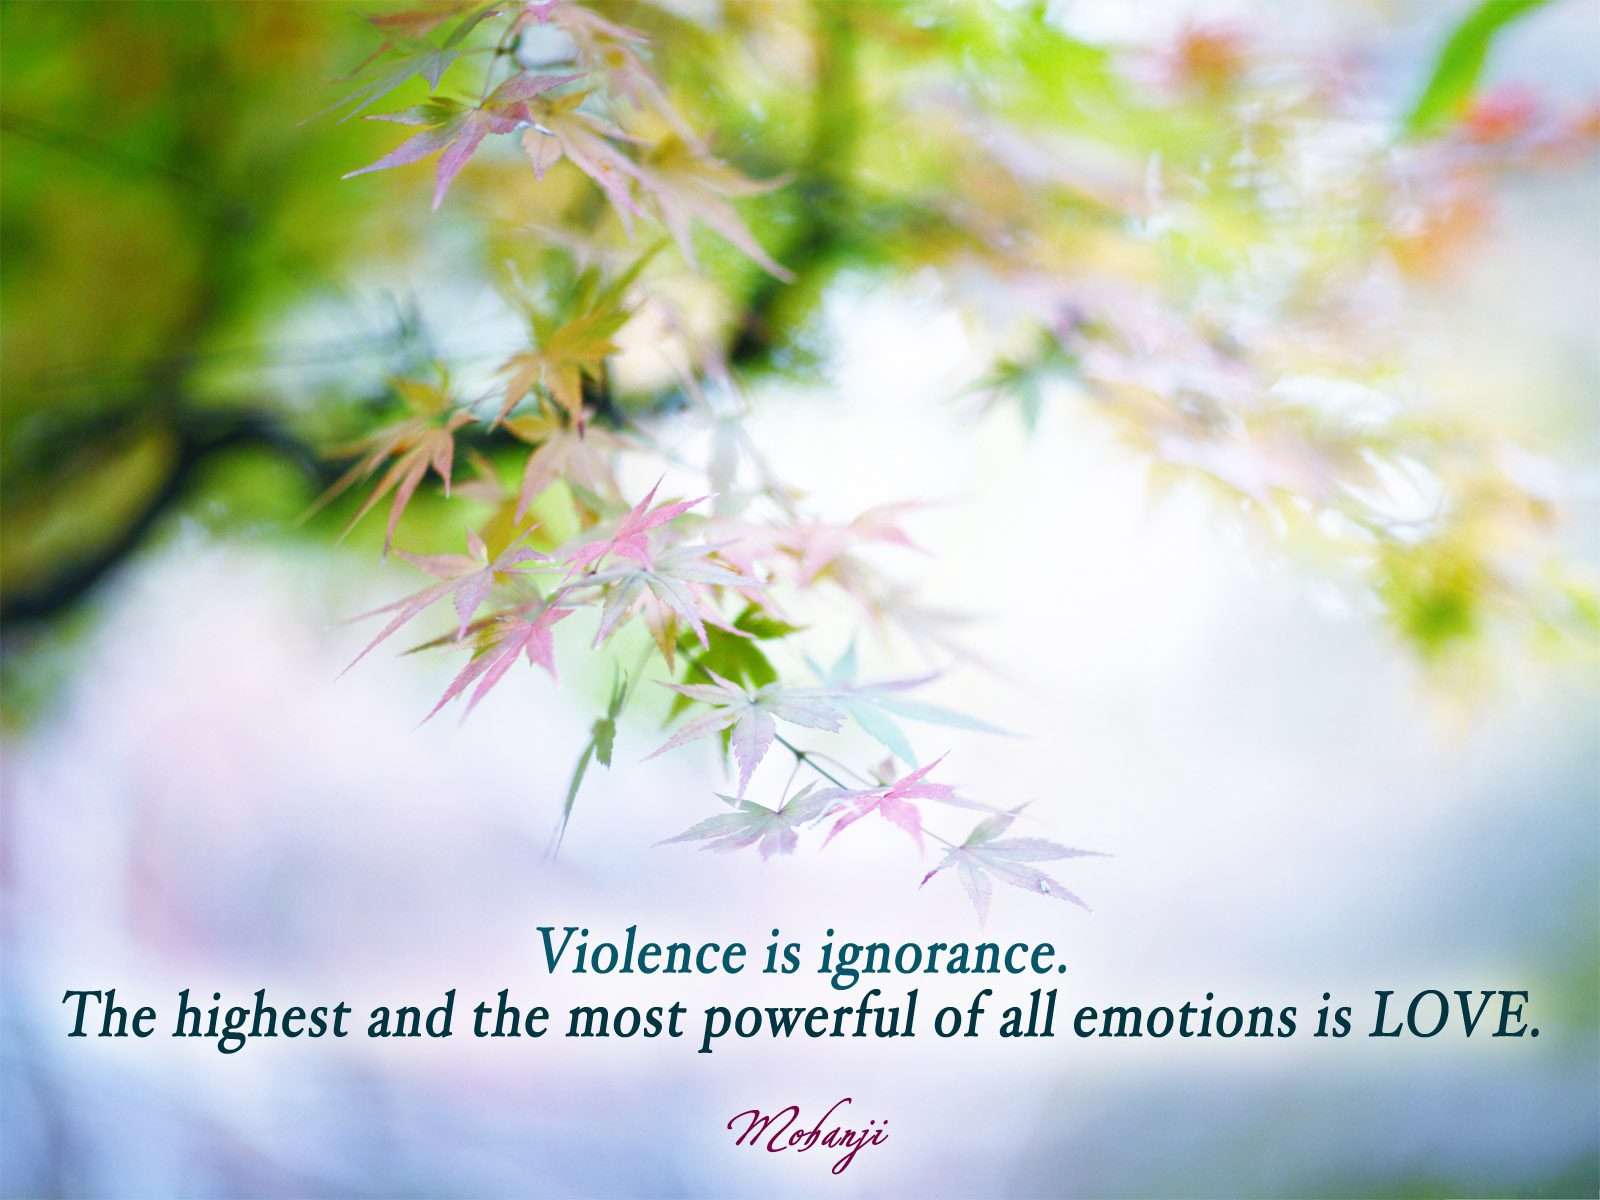 mohanji-quote-violence-is-ignorance